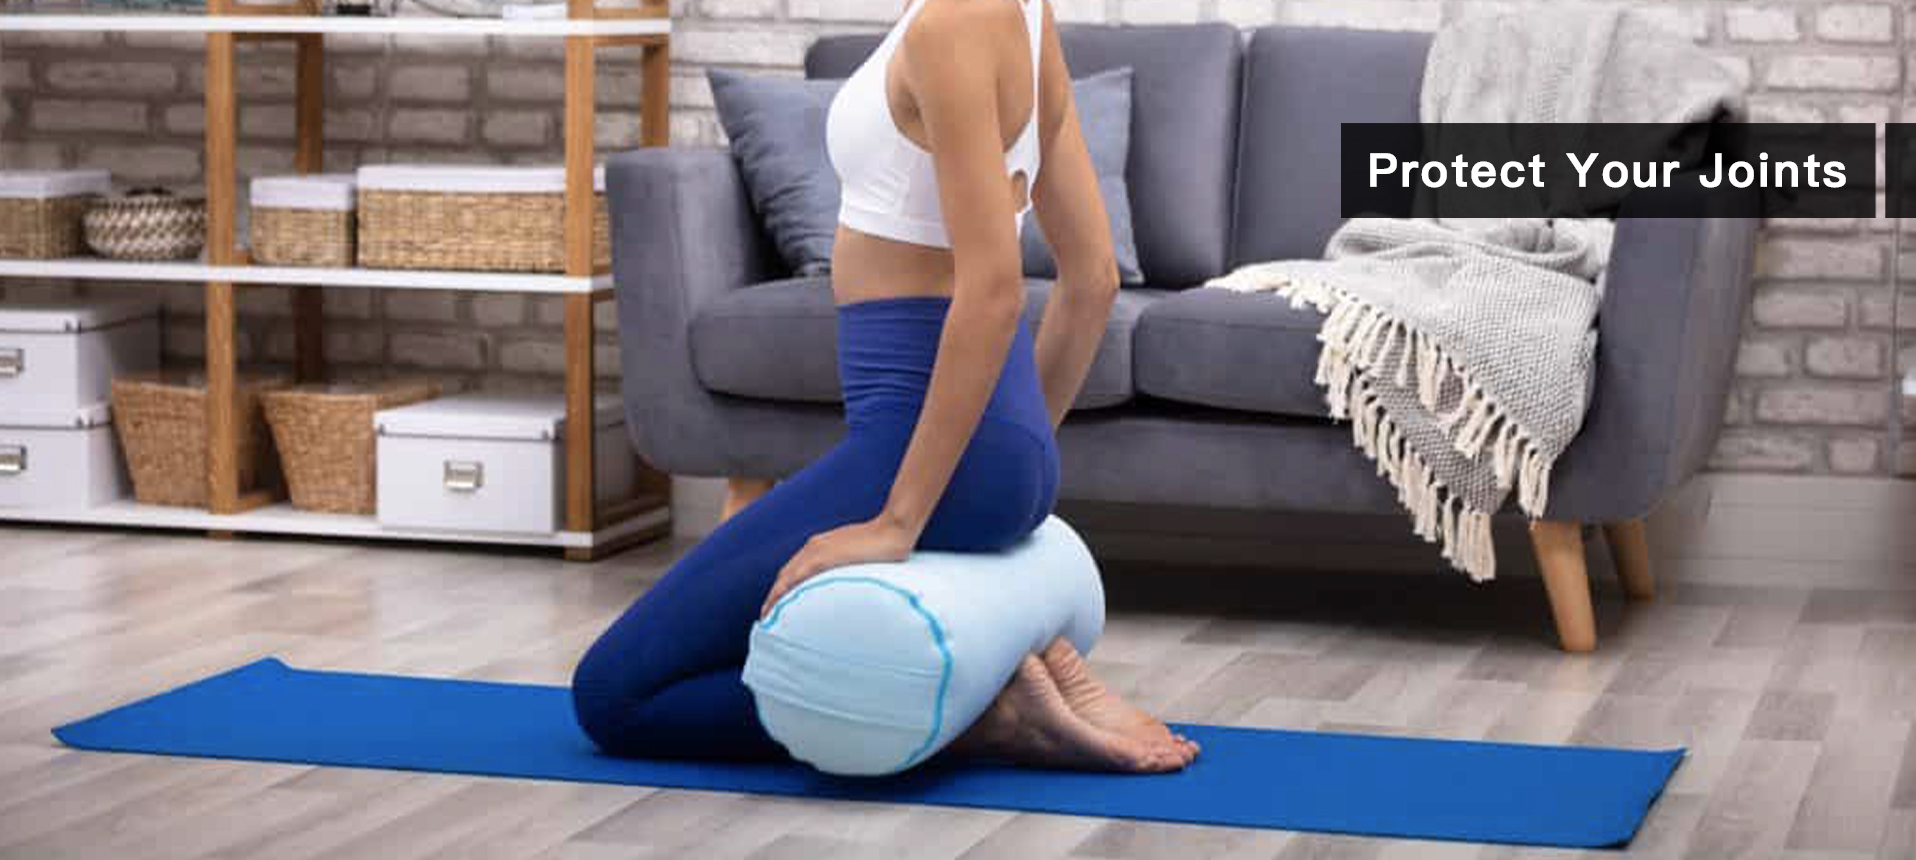 Protect your joints yoga mat